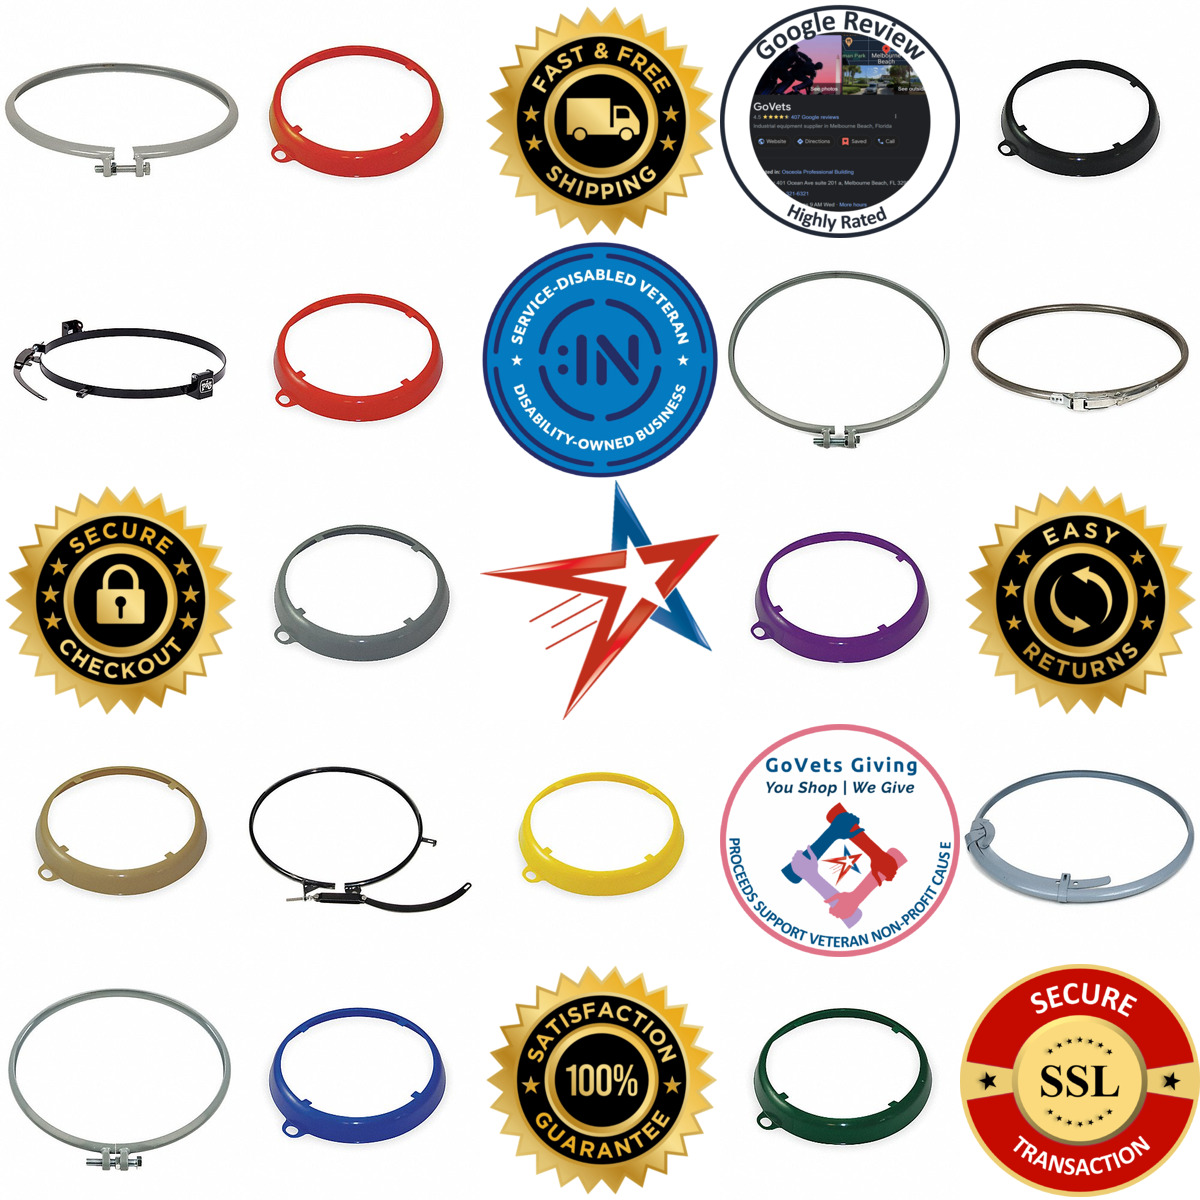 A selection of Drum Rings products on GoVets